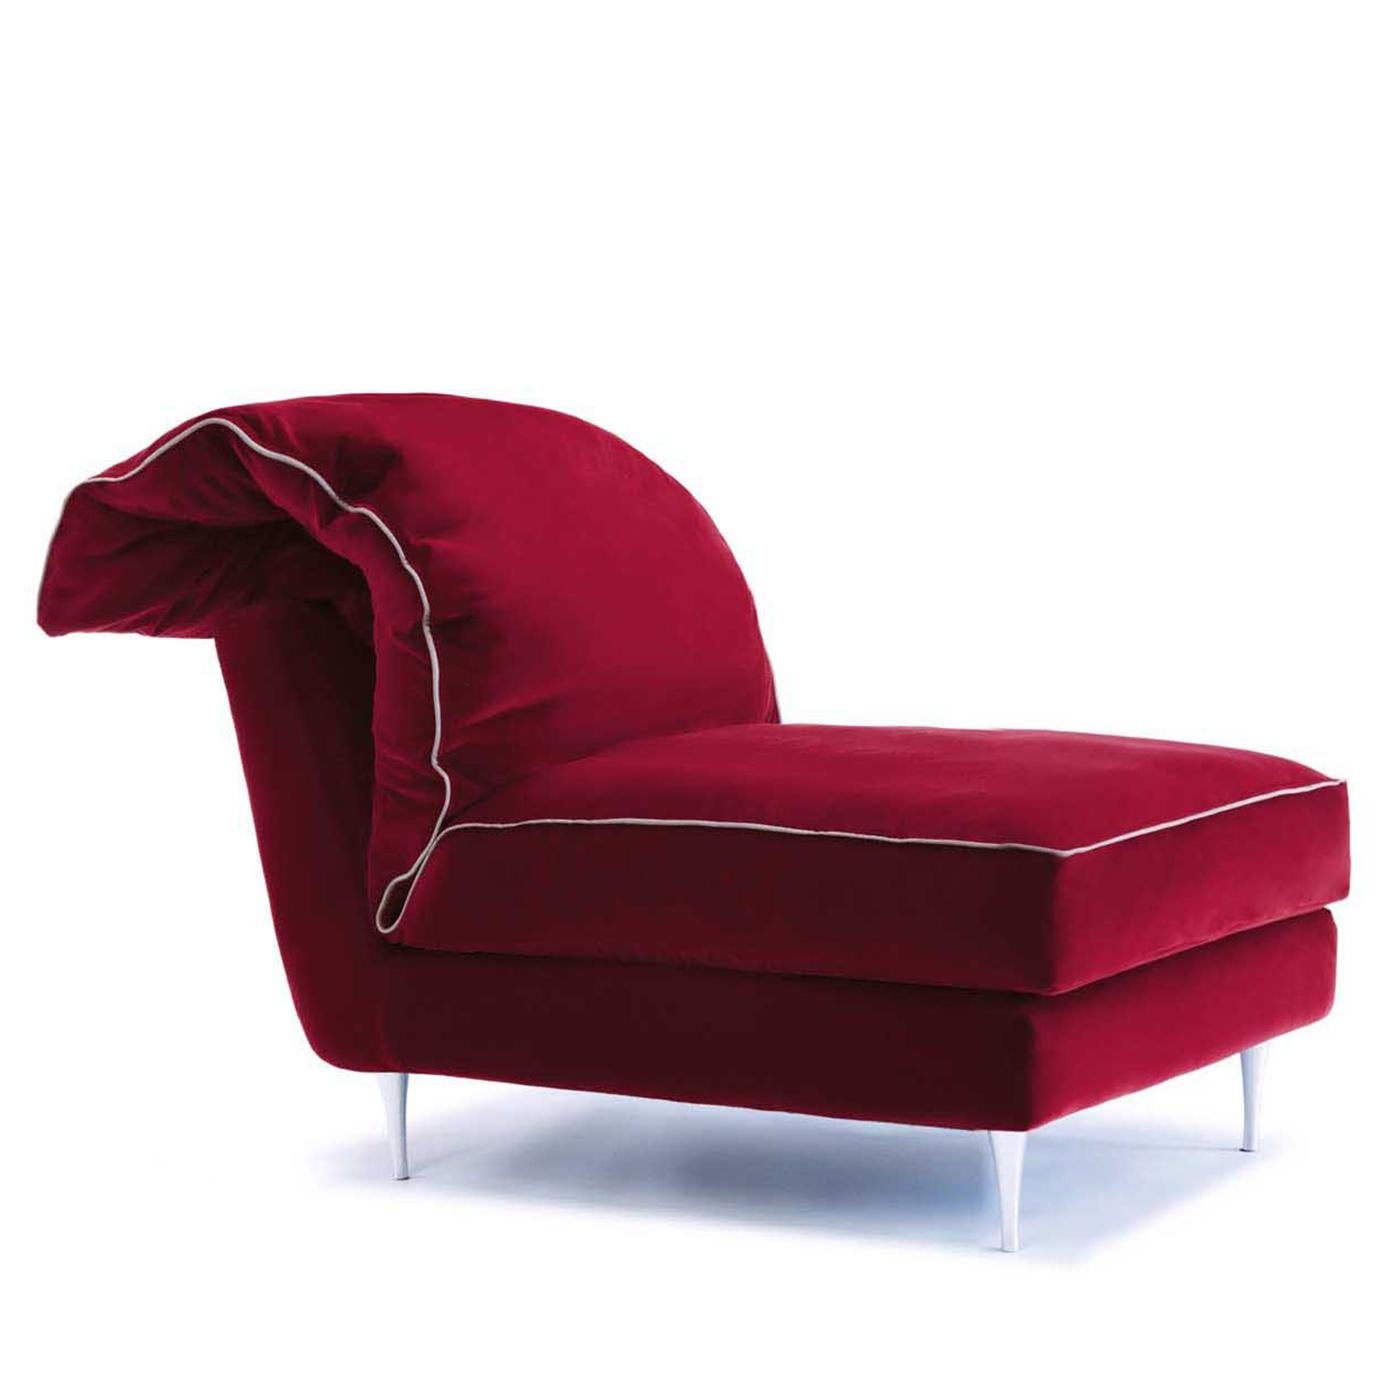 Italian Casquet Mini in Passion Red Velvet Daybed For Sale